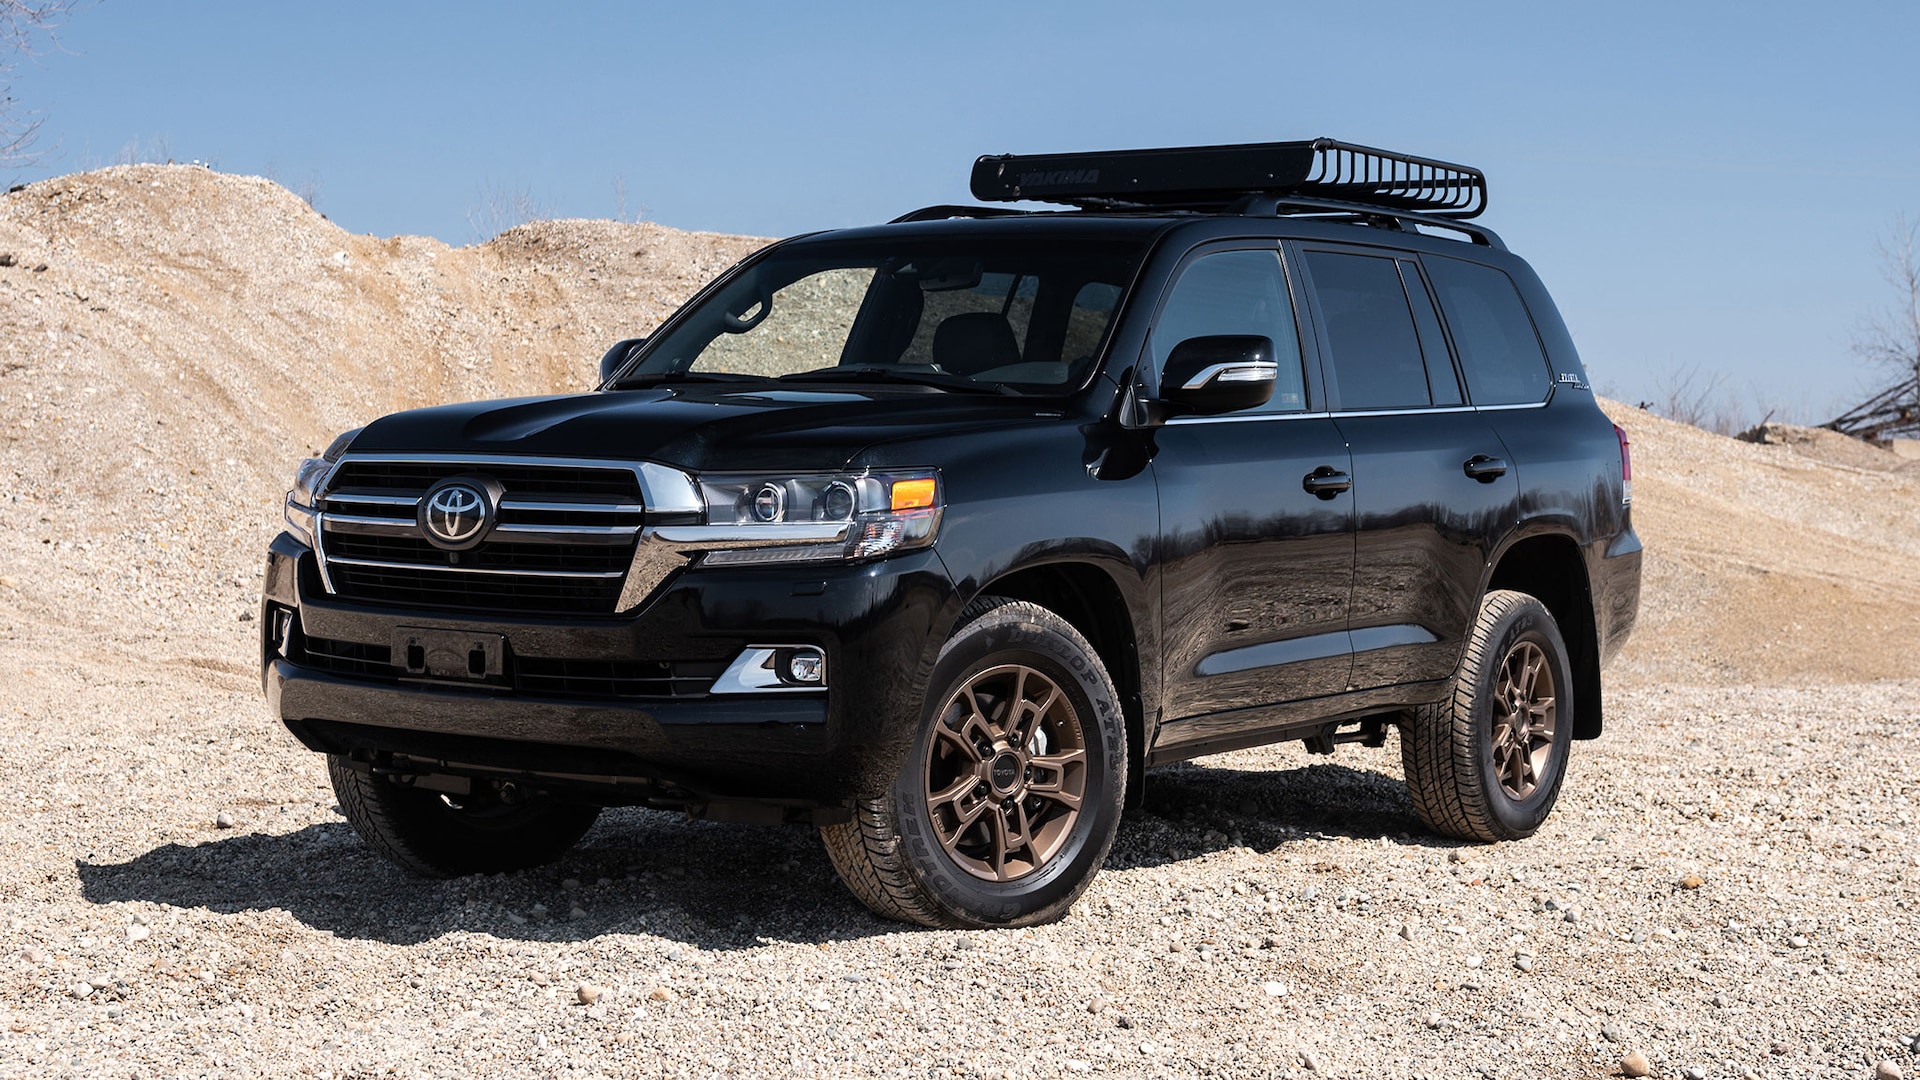 2020 Toyota Land Cruiser Heritage Edition: Ultimate Bug-Out Buggy?